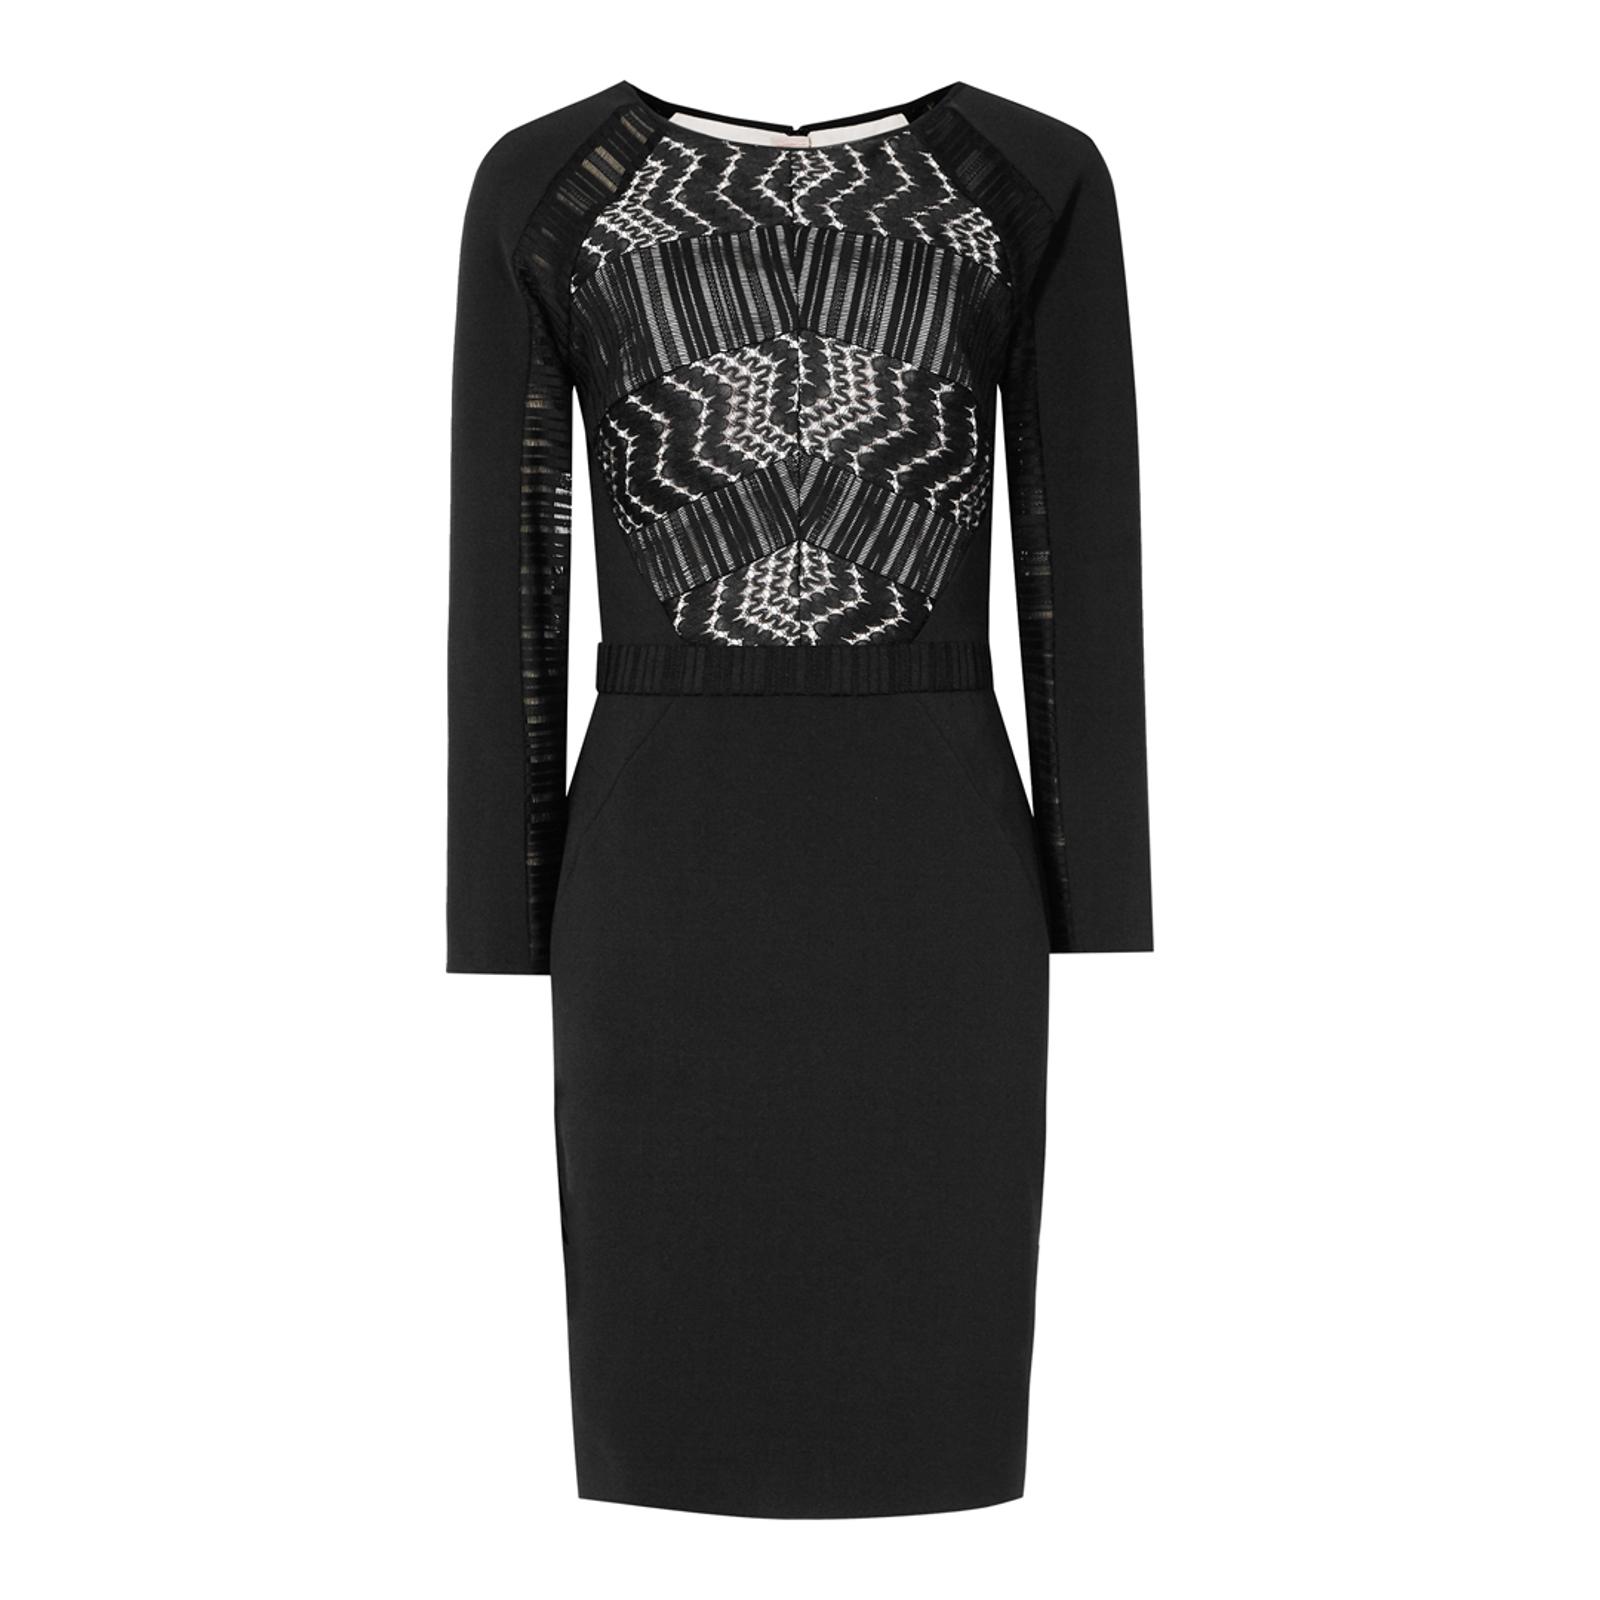 Black Lace Panelled Libby Dress - BrandAlley